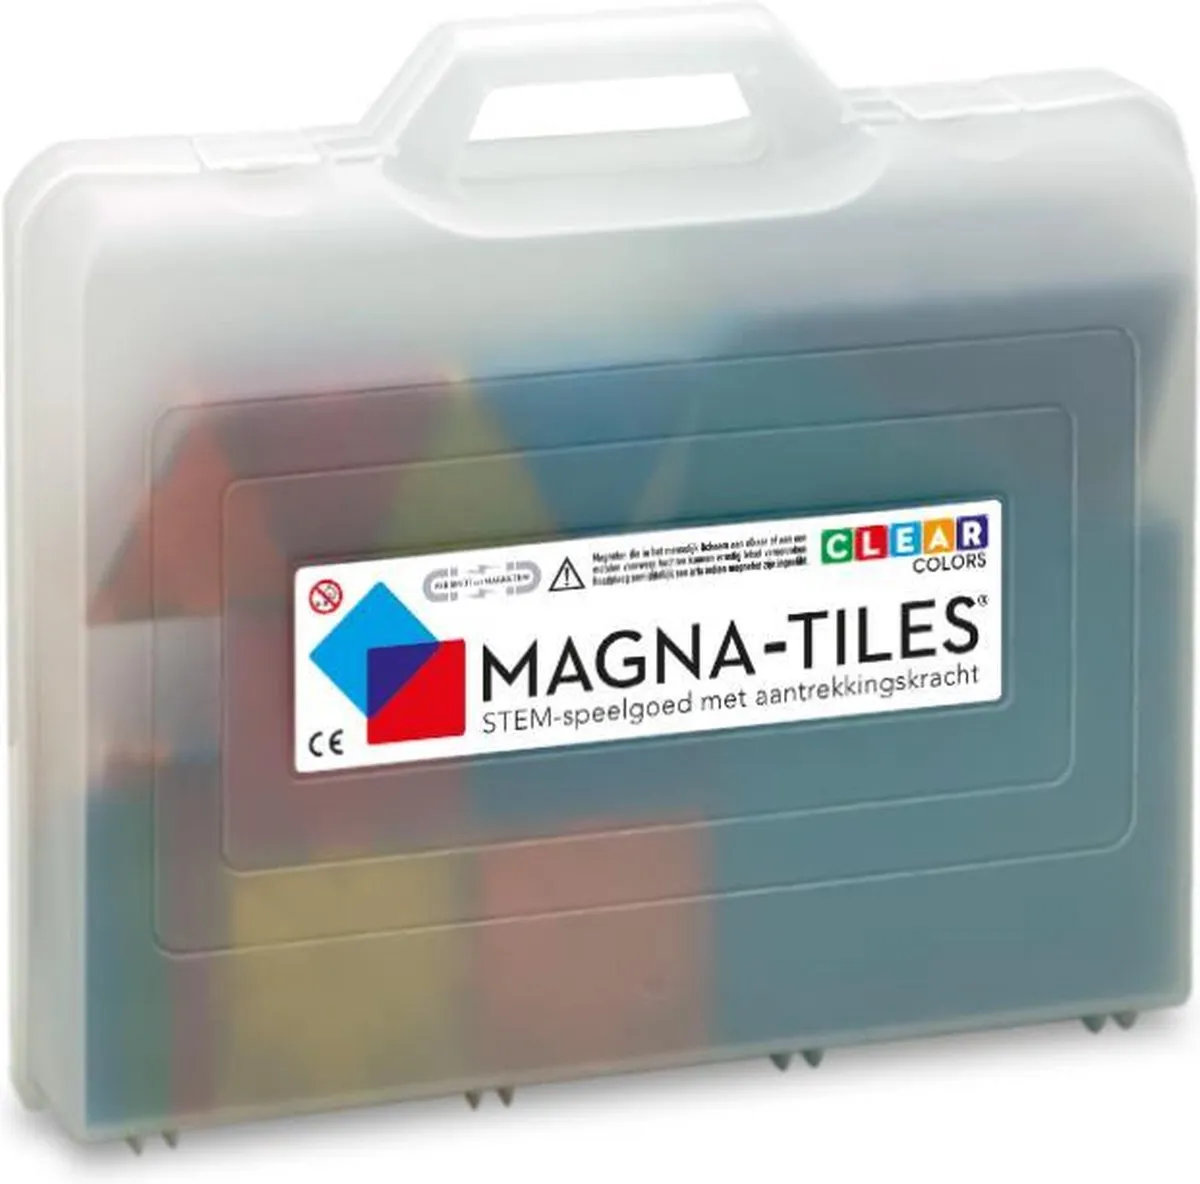 Magna-Tiles Clear Colors 100 in Bewaarkoffer - Magnetisch Speelgoed speelgoed